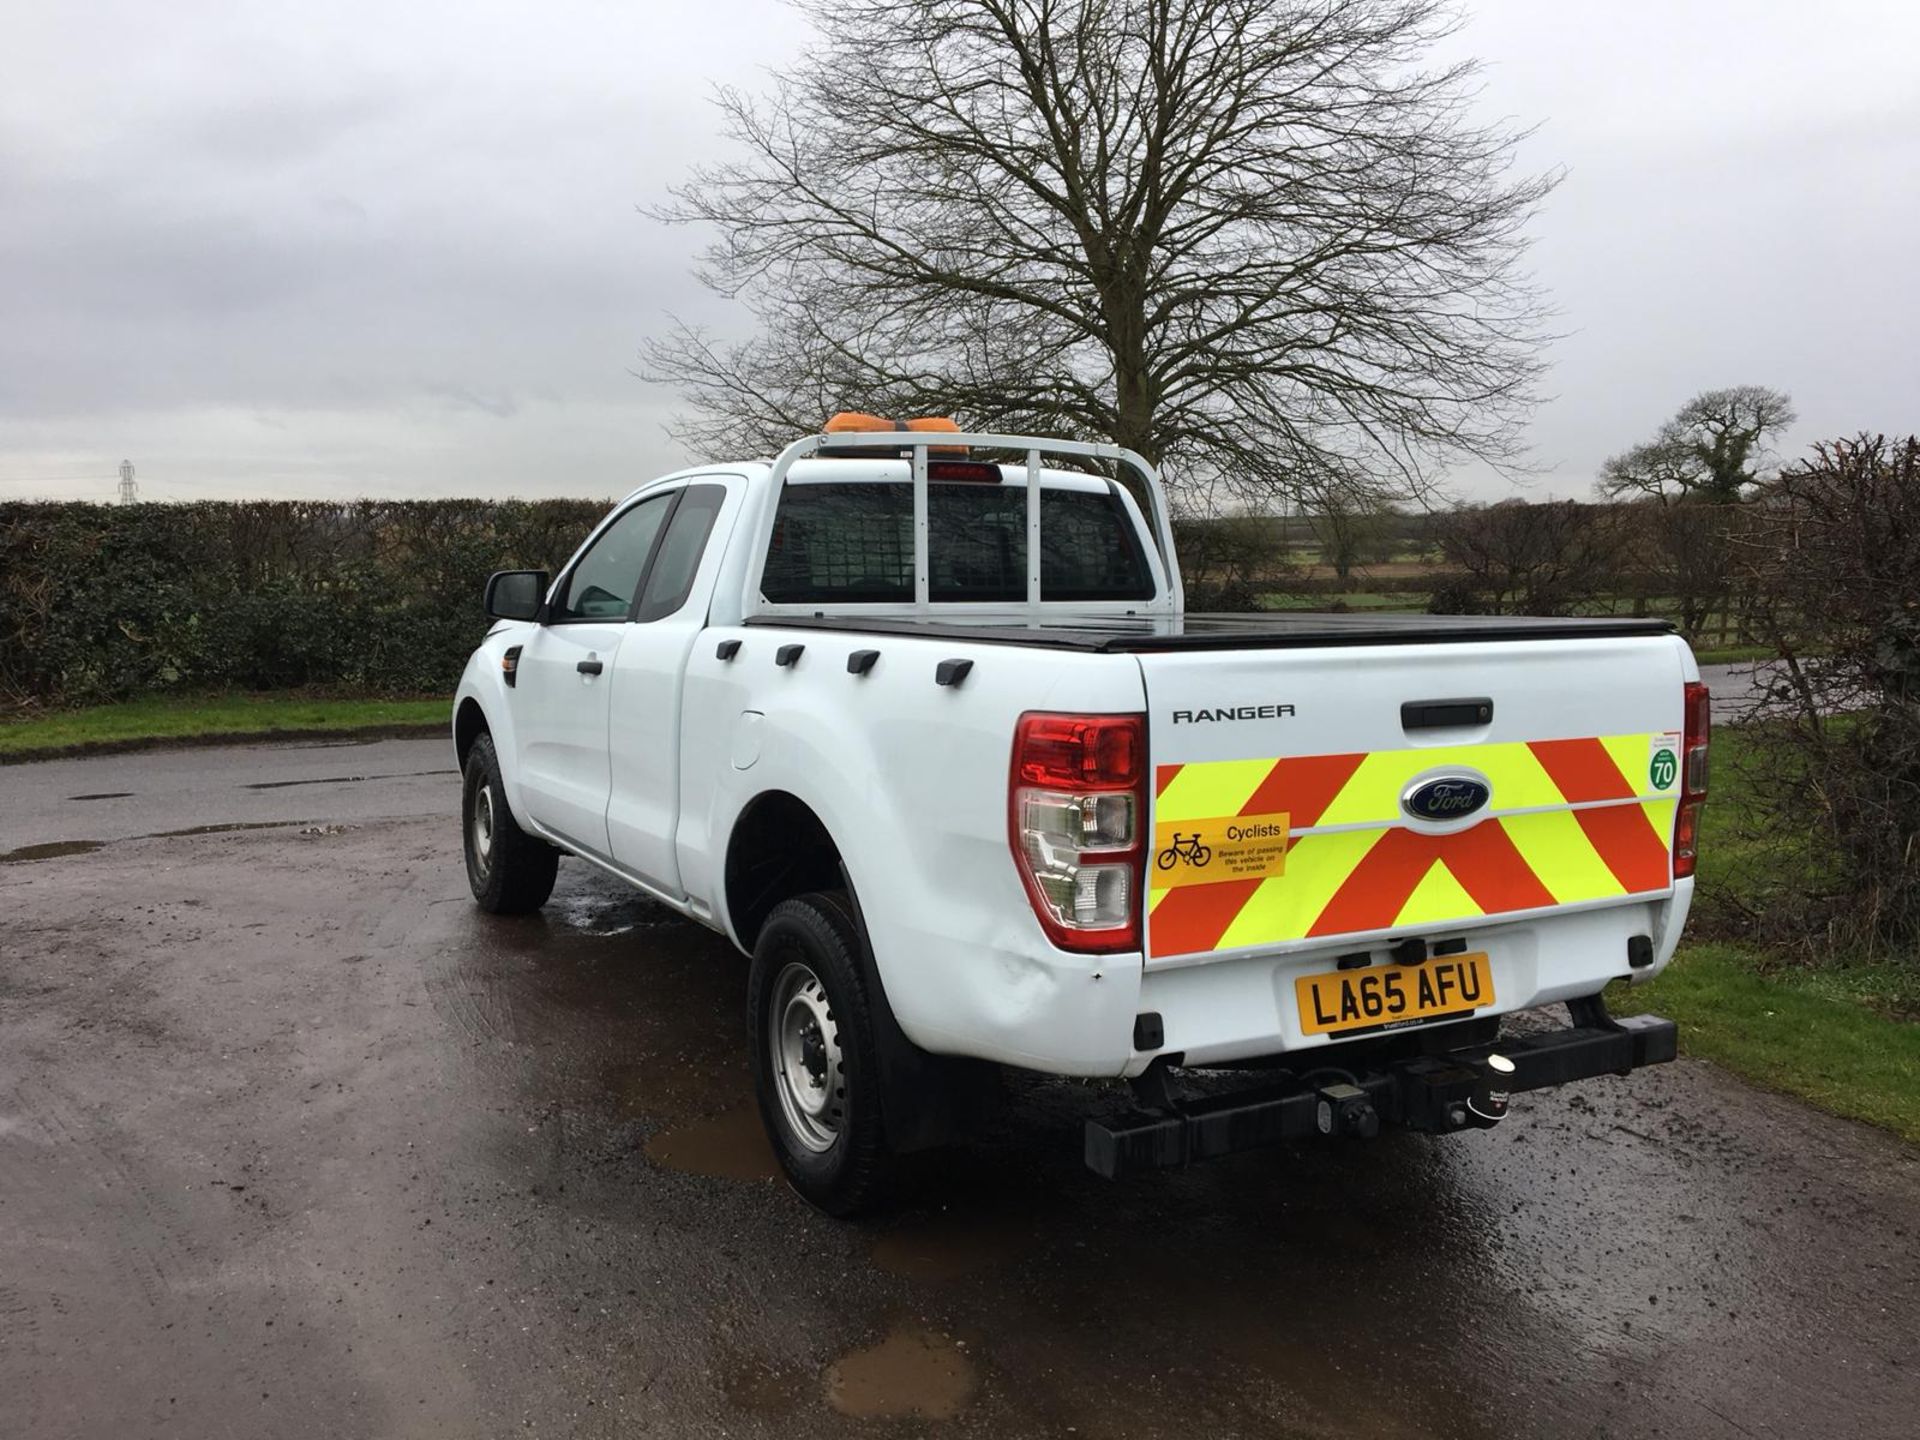 2016/65 REG FORD RANGER XL 4X4 DCB TDCI WHITE DIESEL PICK-UP, SHOWING 0 FORMER KEEPERS *NO VAT* - Image 5 of 12